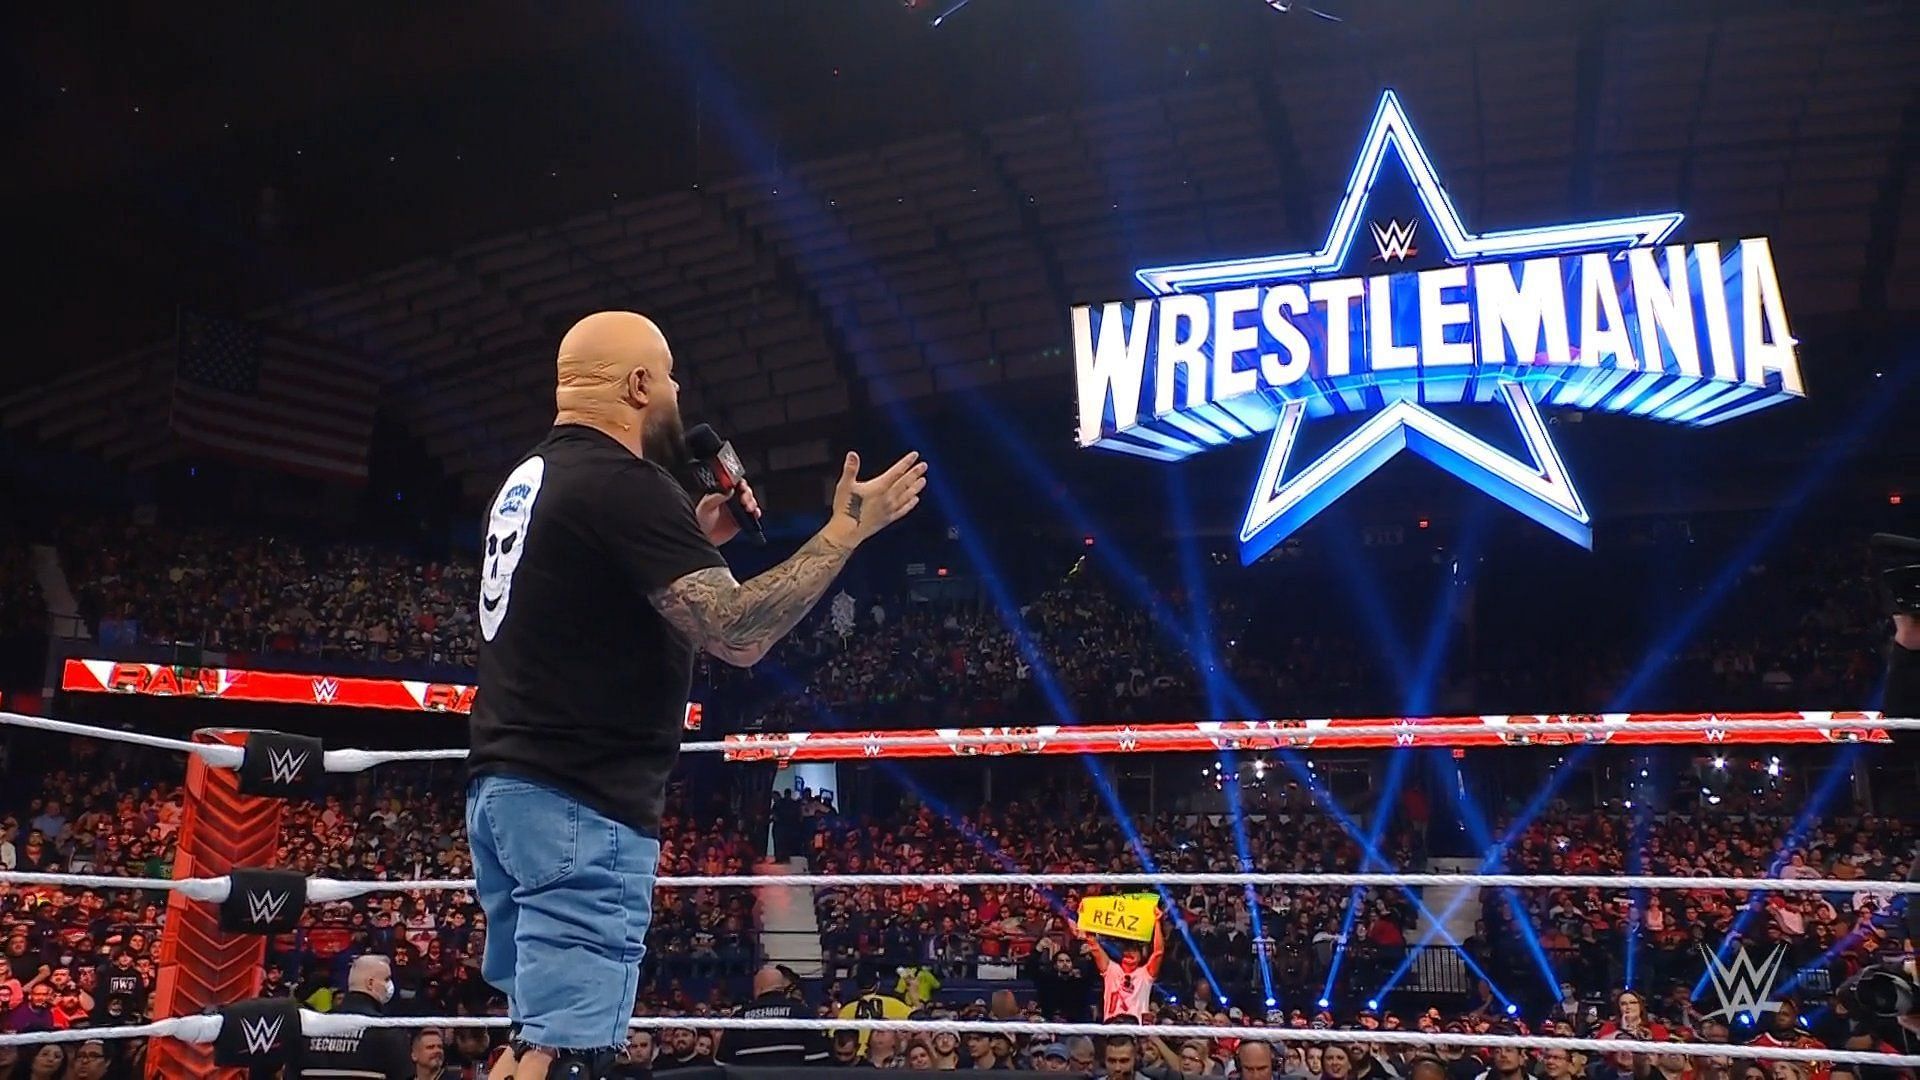 &quot;Stone Cold&quot; Steve Austin was impersonated on WWE RAW